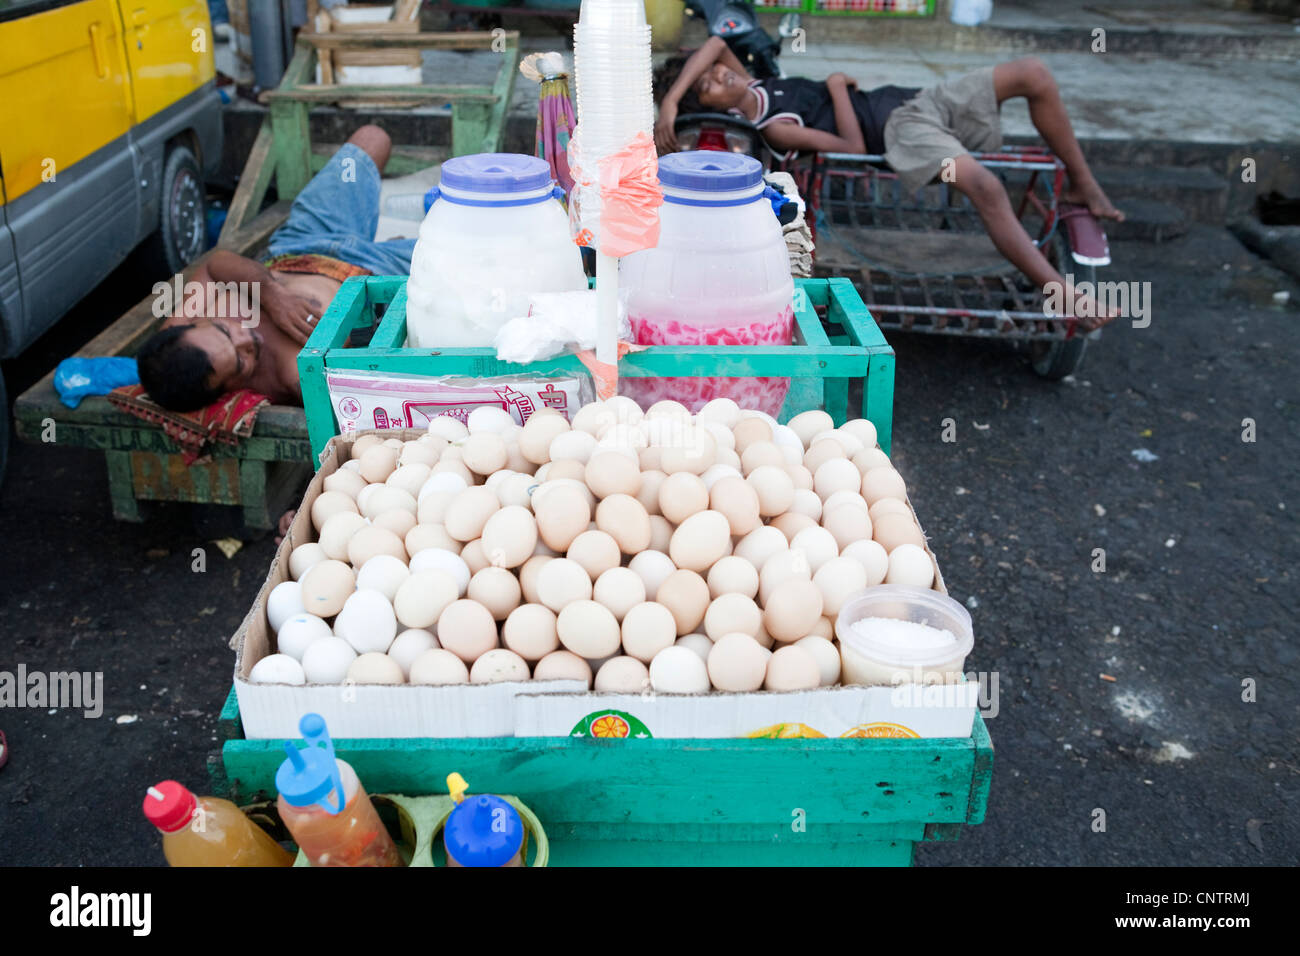 Workers sleeping next to a roadside stall selling Balut, a fertilized duck embryo. Carbon Market, Cebu City, Philippines. Stock Photo